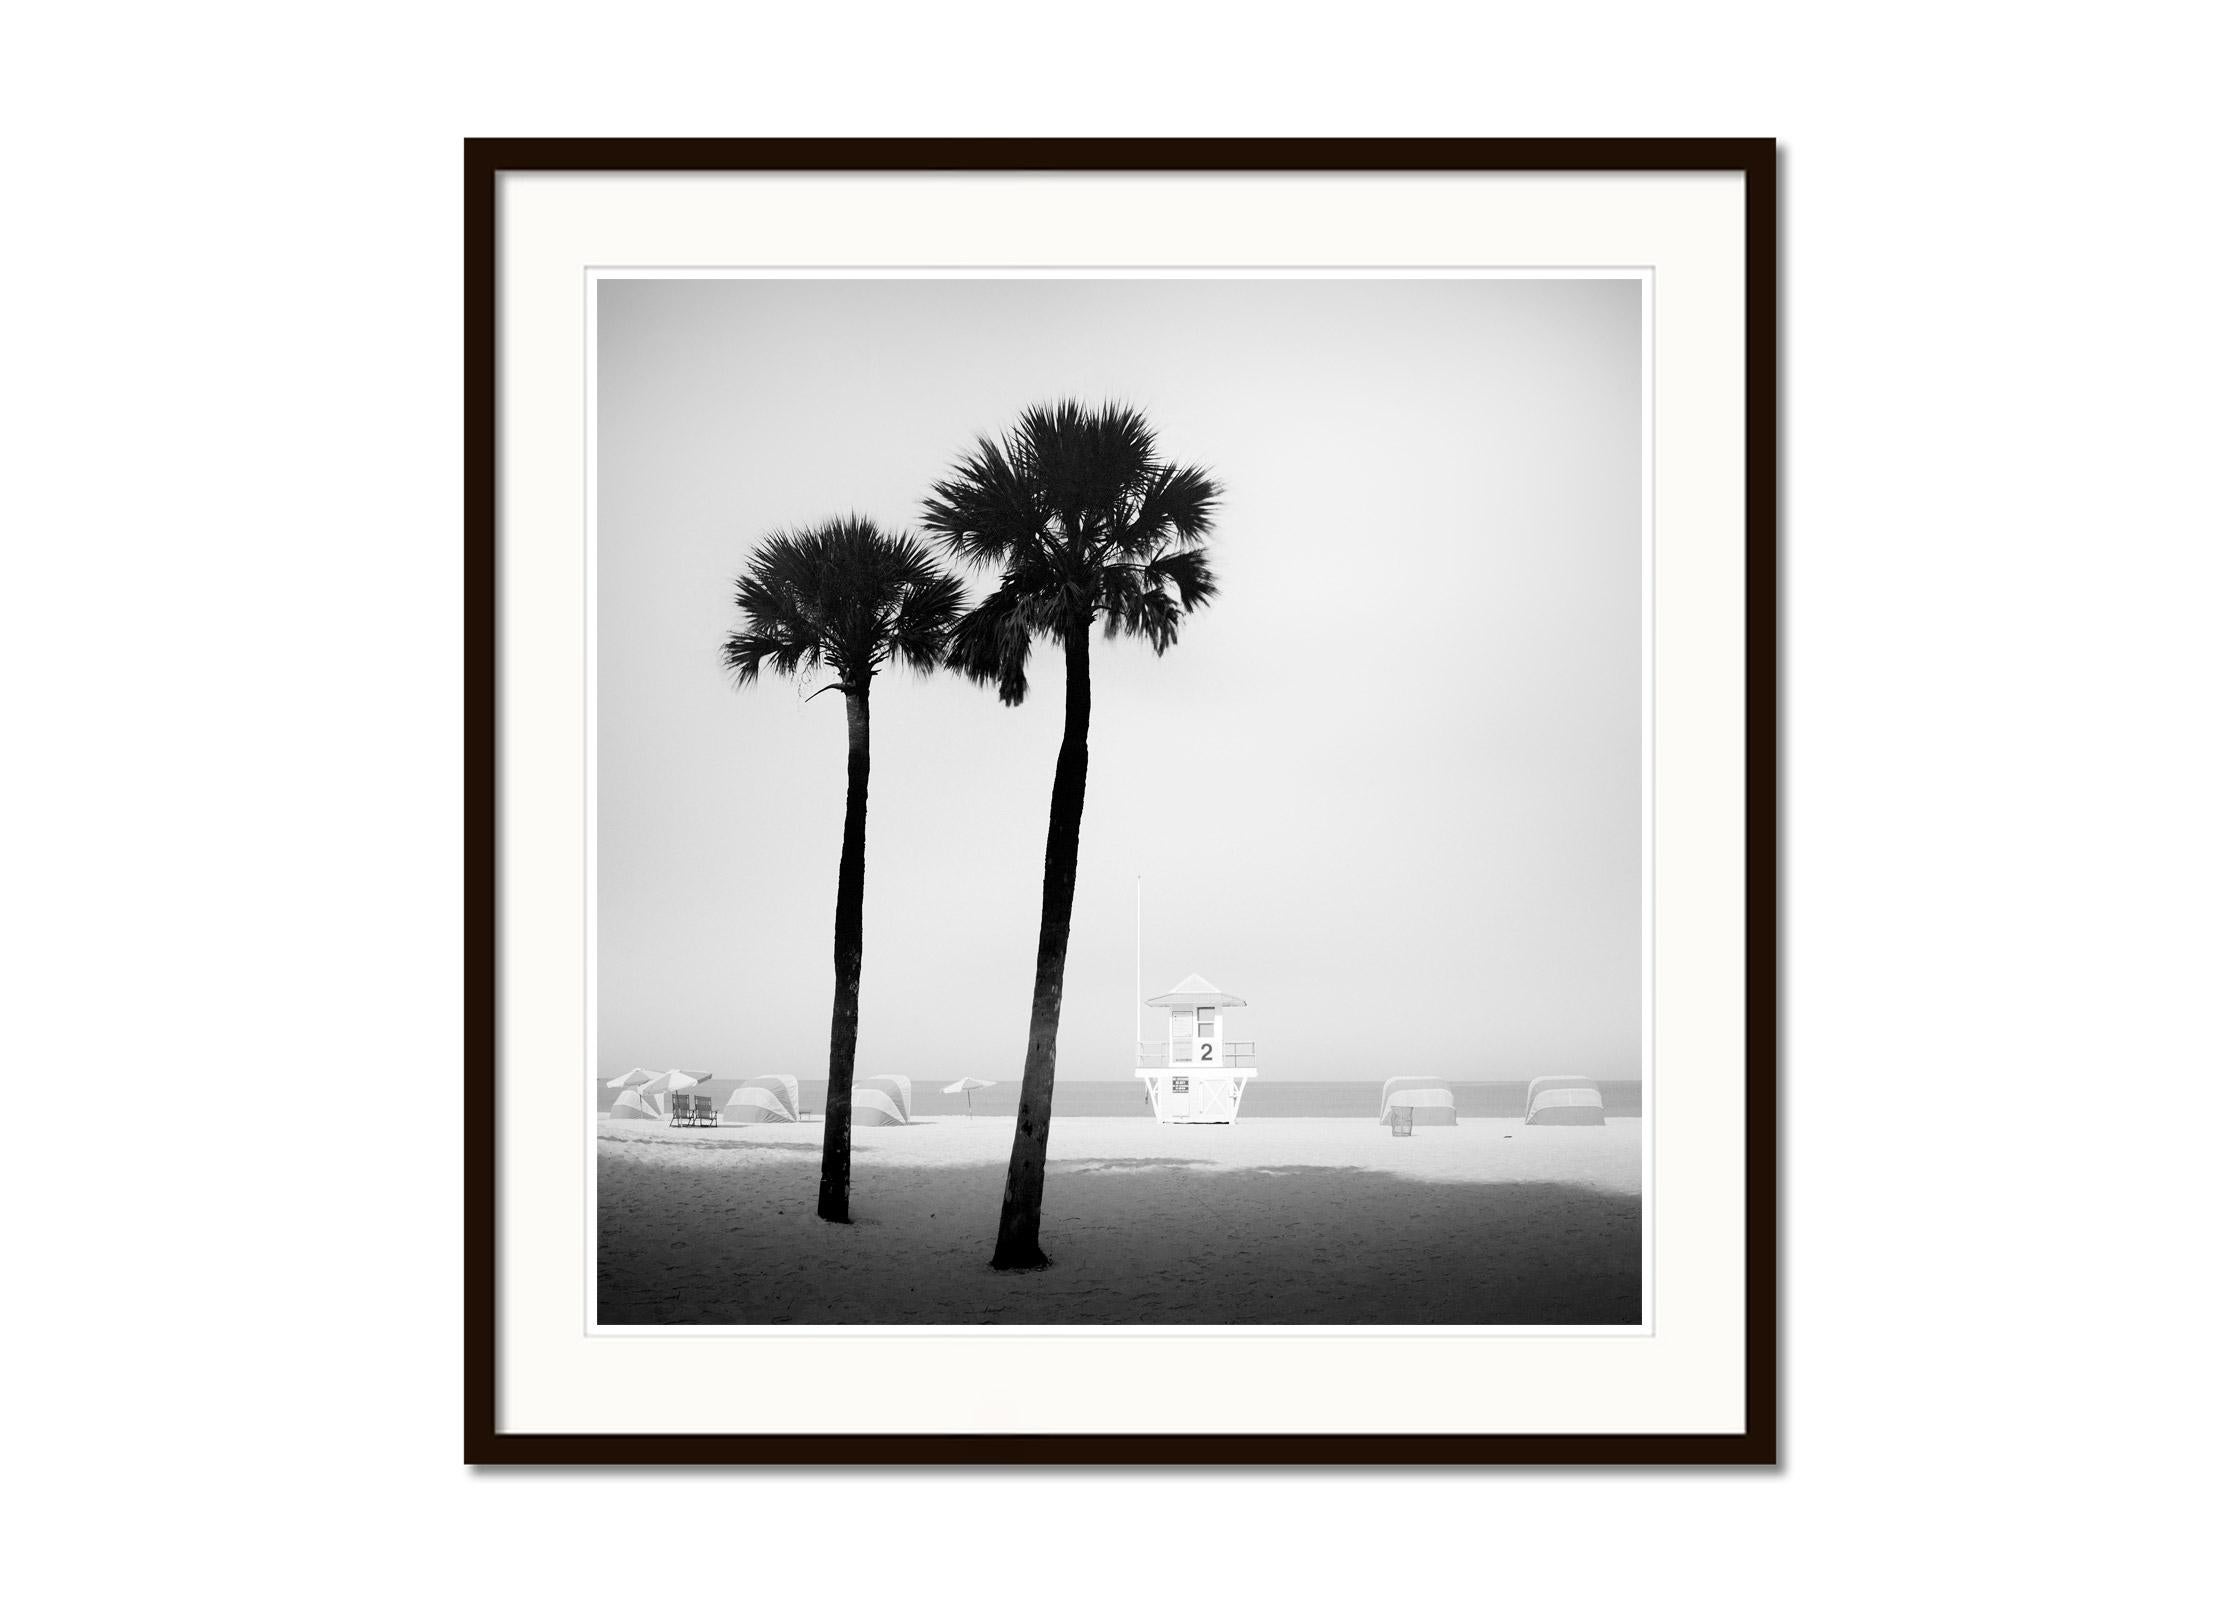 Black and White Fine Art Photography - Lifeguard tower on Miami beach with palm trees and beach chairs, Florida, USA. Archival pigment ink print, edition of 9. Signed, titled, dated and numbered by artist. Certificate of authenticity included.